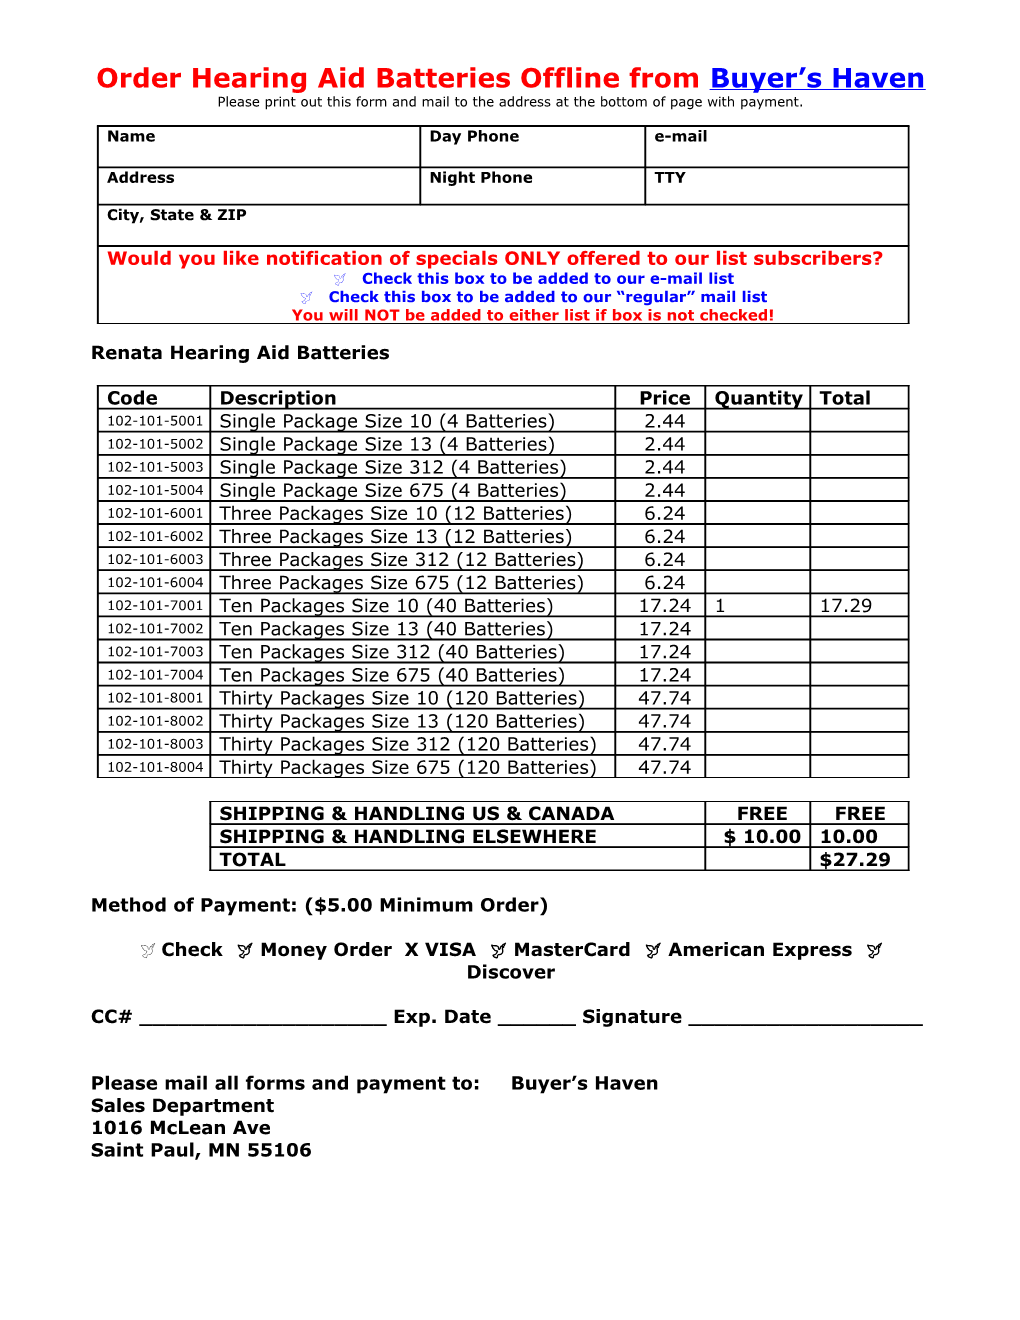 Offline Order Form for Hearing Aid Products from Buyer's Haven